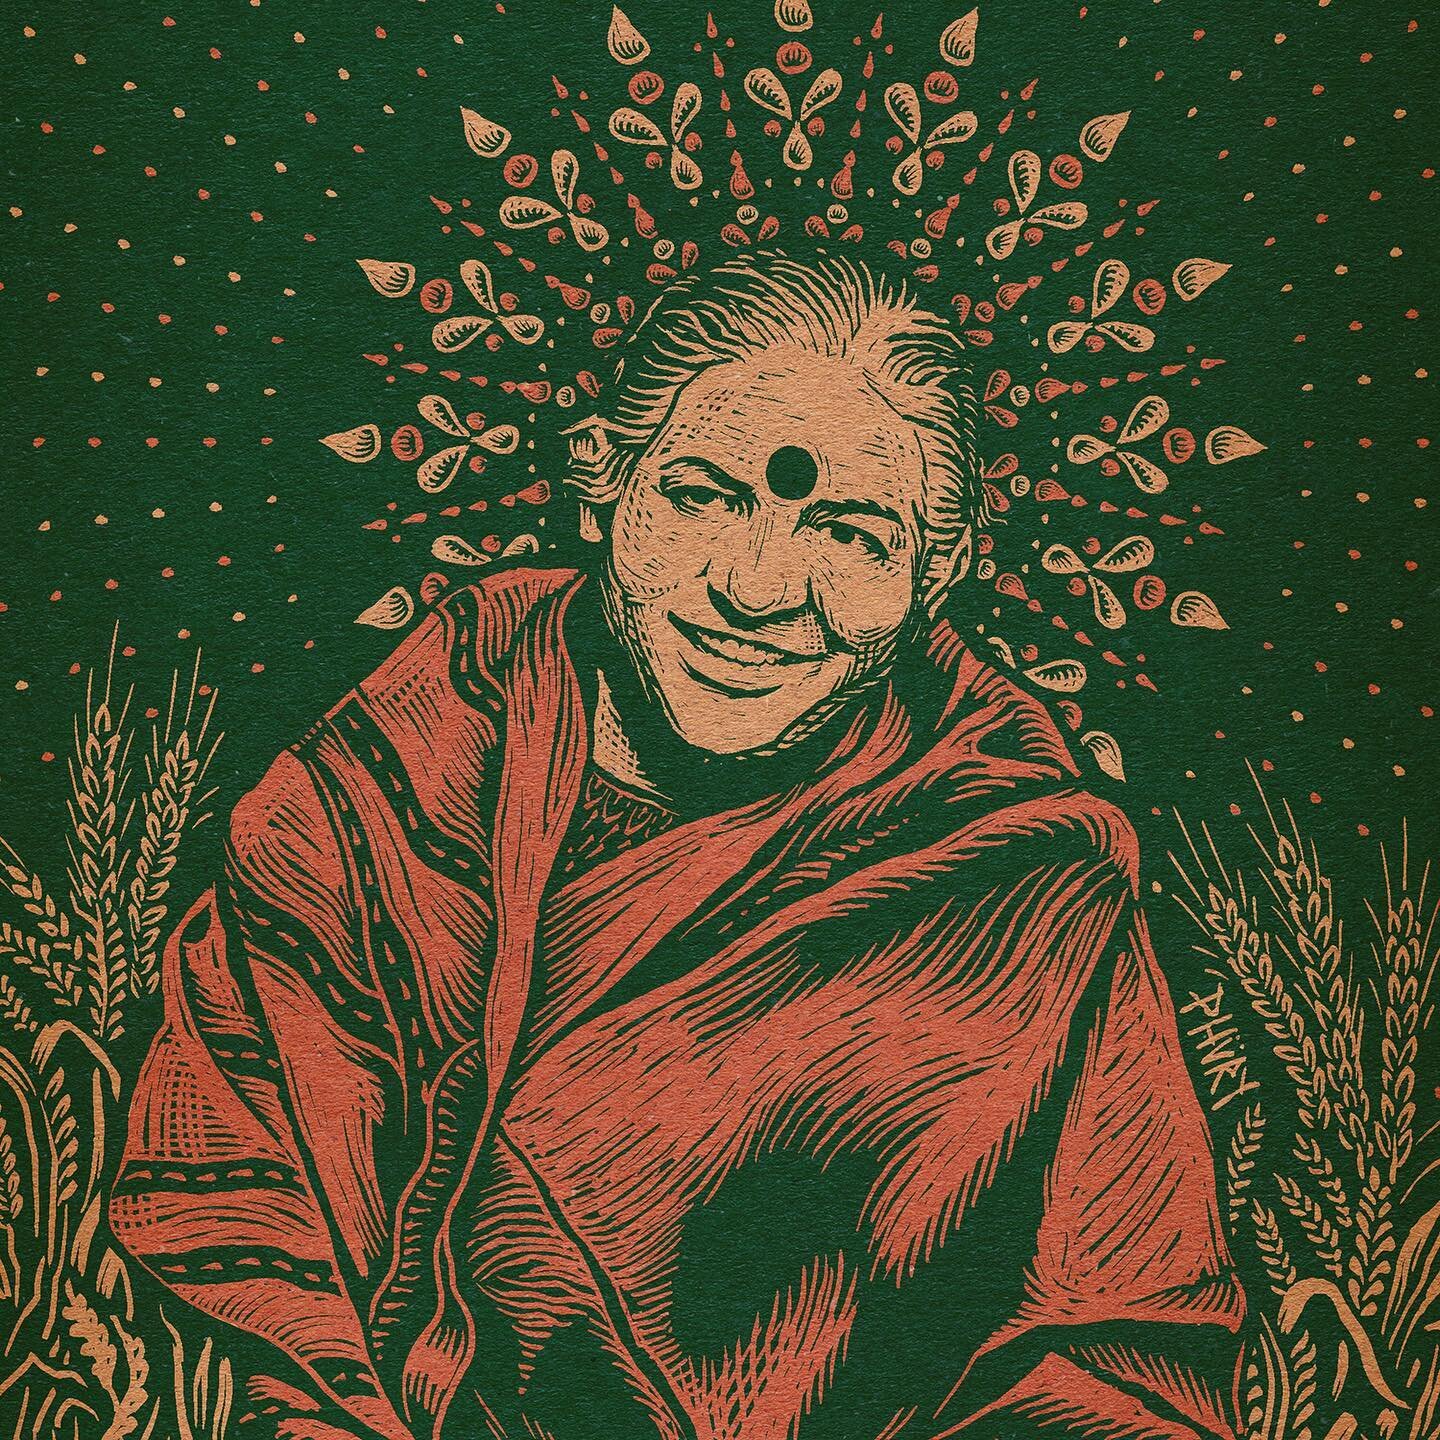 VANDANA SHIVA is the singular most important voice advocating for global solidarity and civil disobedience against anti-democratic, multinational corporations. A new documentary film entitled, The Seeds of Vandana Shiva, will be released tomorrow, Fr